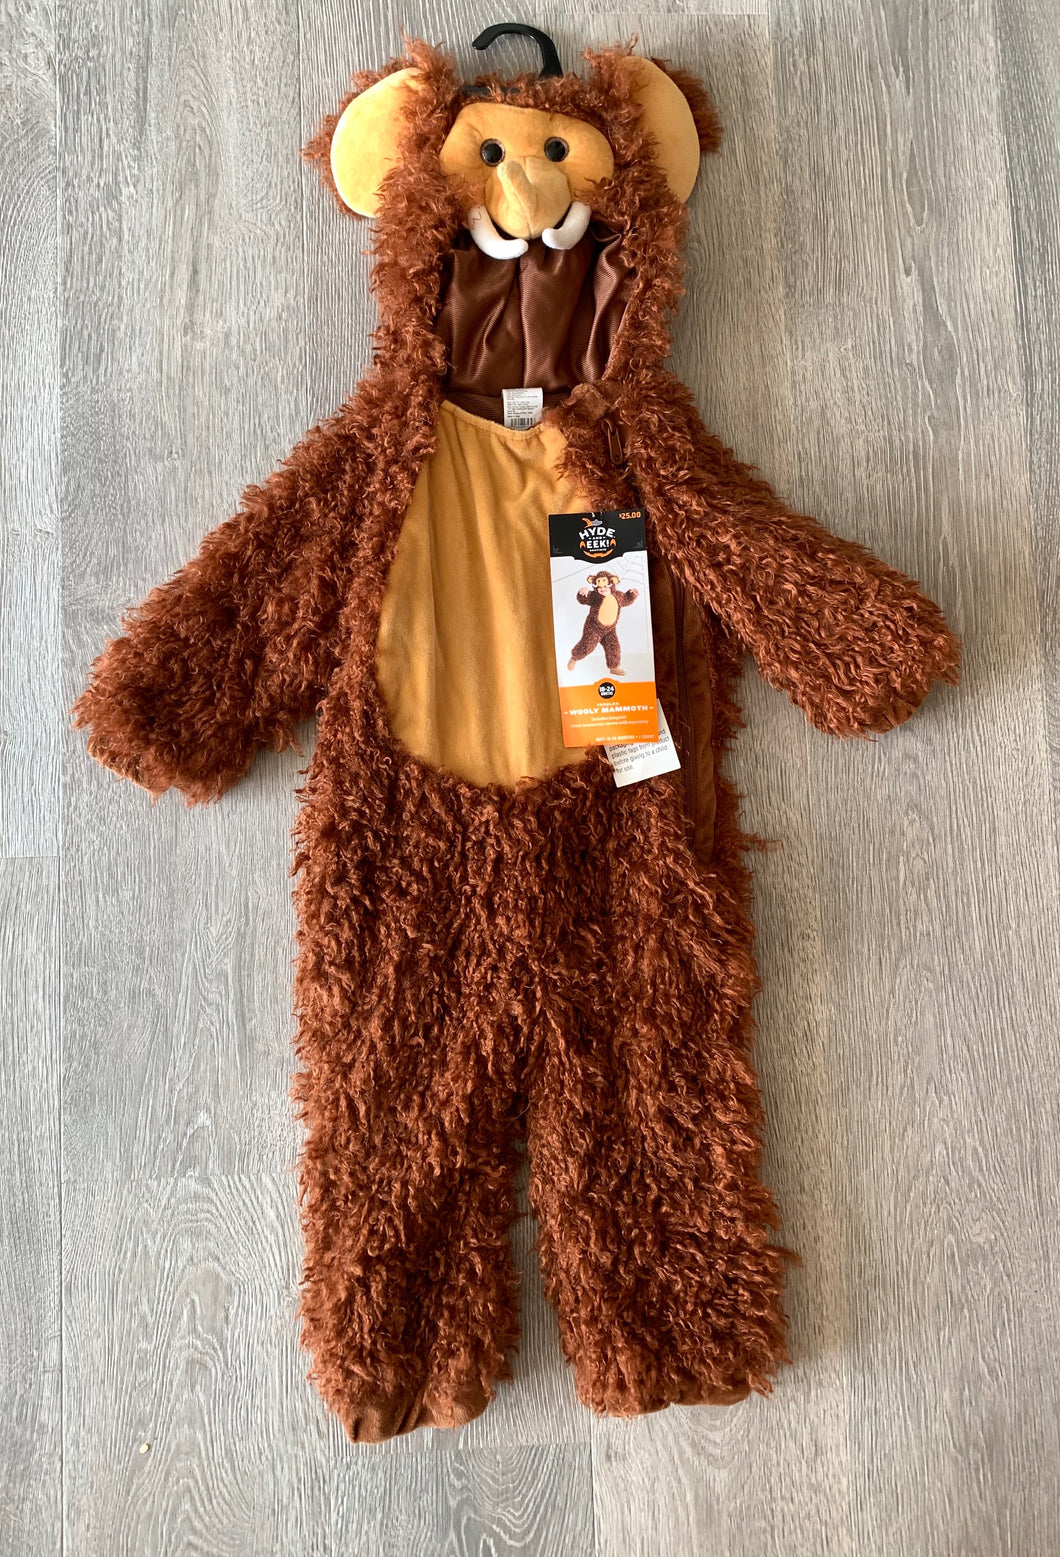 Wooly Mammoth Toddler Jumpsuit Costume 18 months